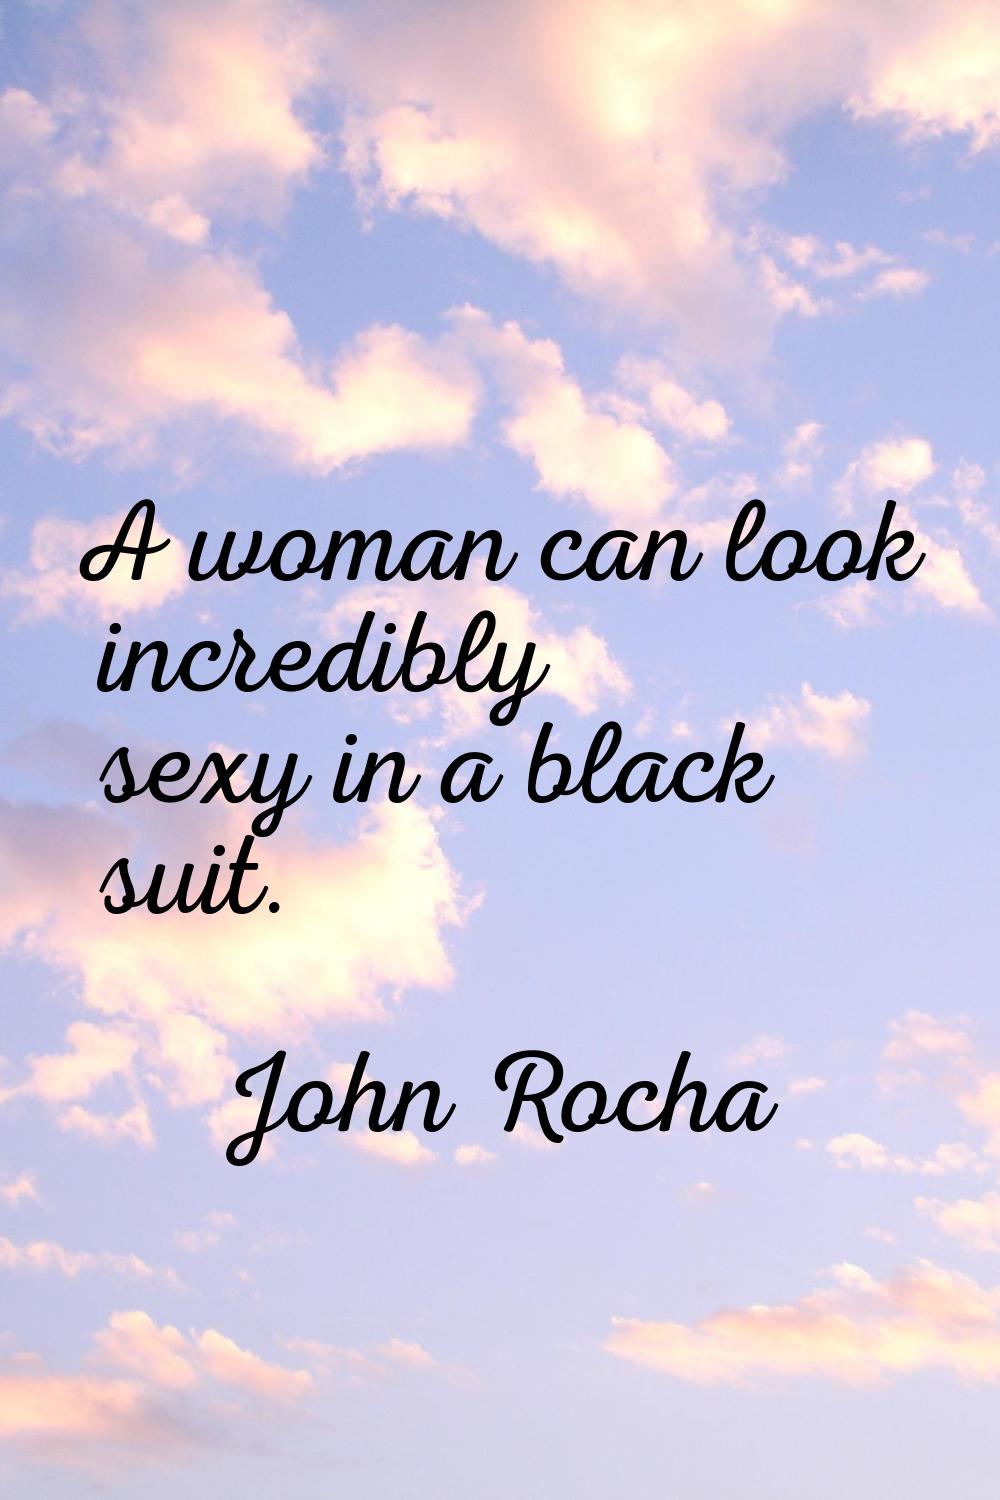 A woman can look incredibly sexy in a black suit.